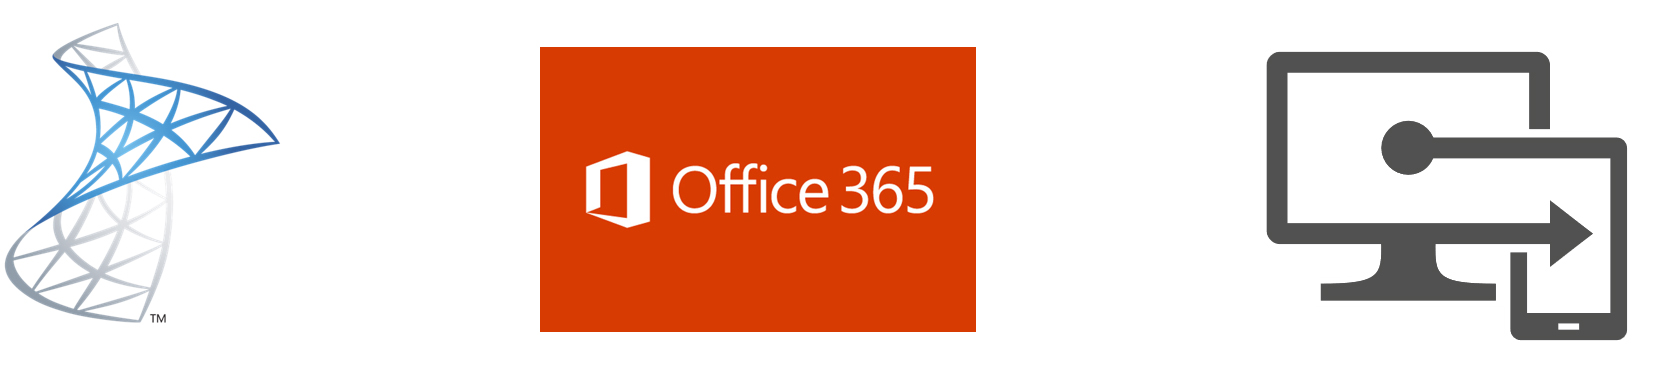 office 365 proplus e3 sharepoint license